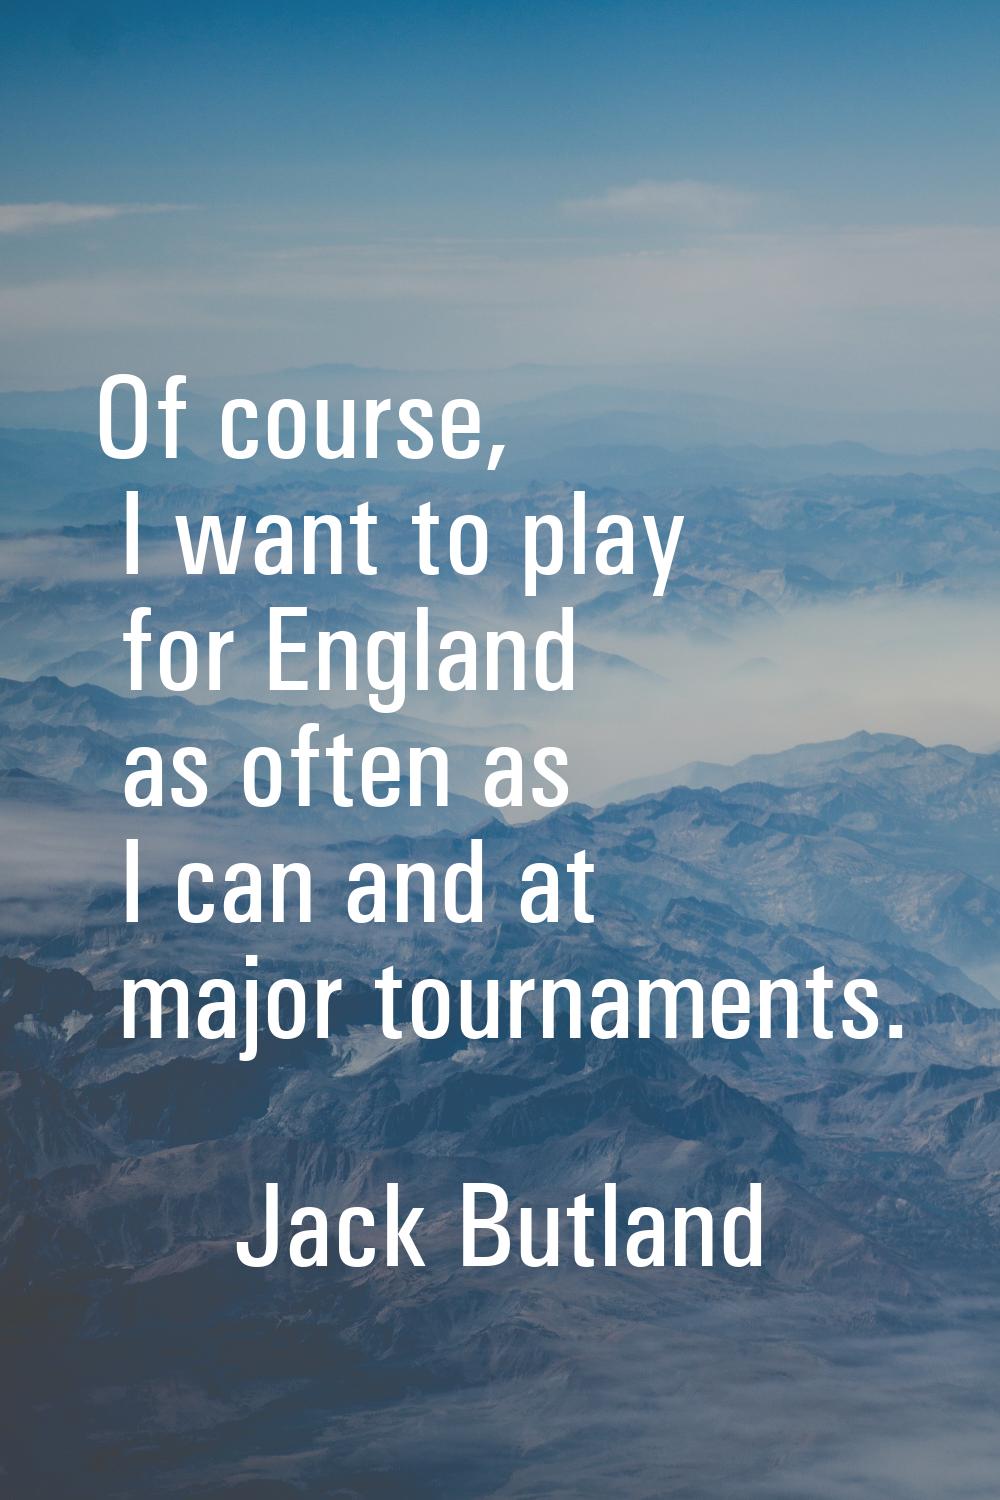 Of course, I want to play for England as often as I can and at major tournaments.